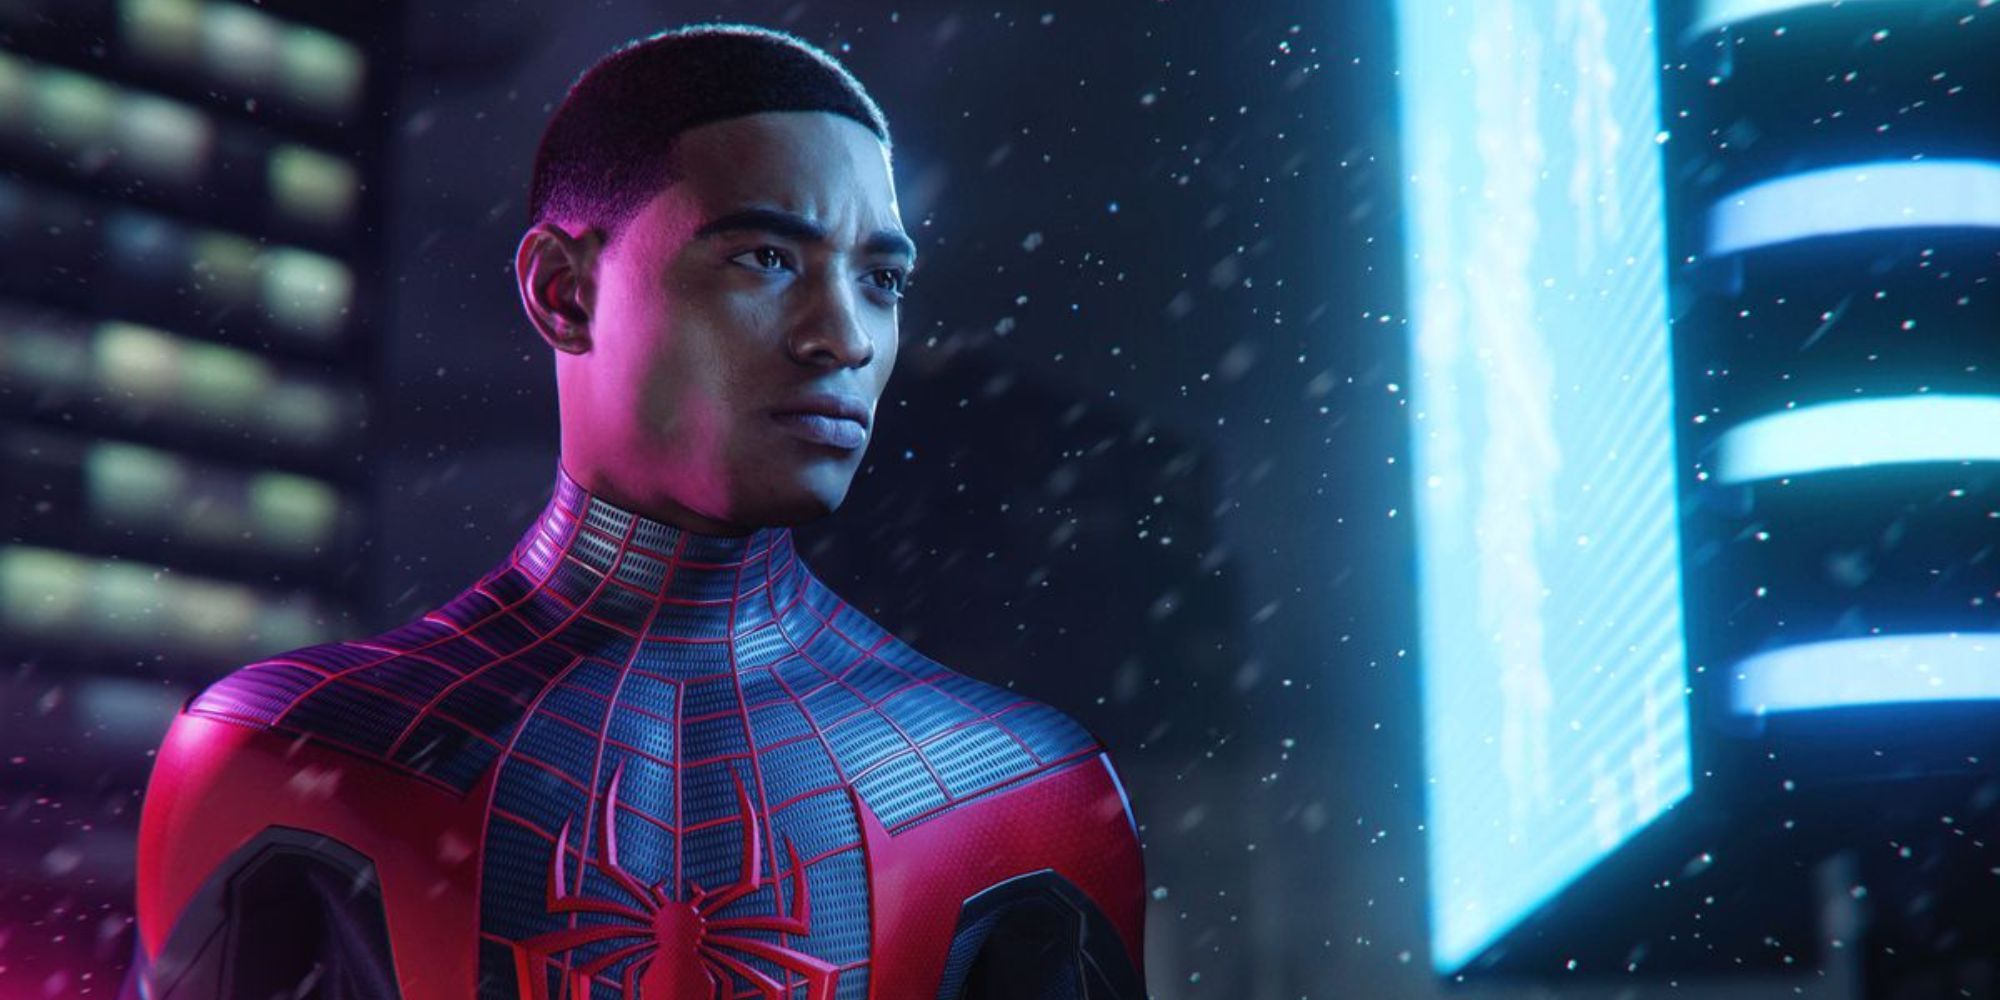 Unmasked Miles Morales from Spider-Man: Miles Morales